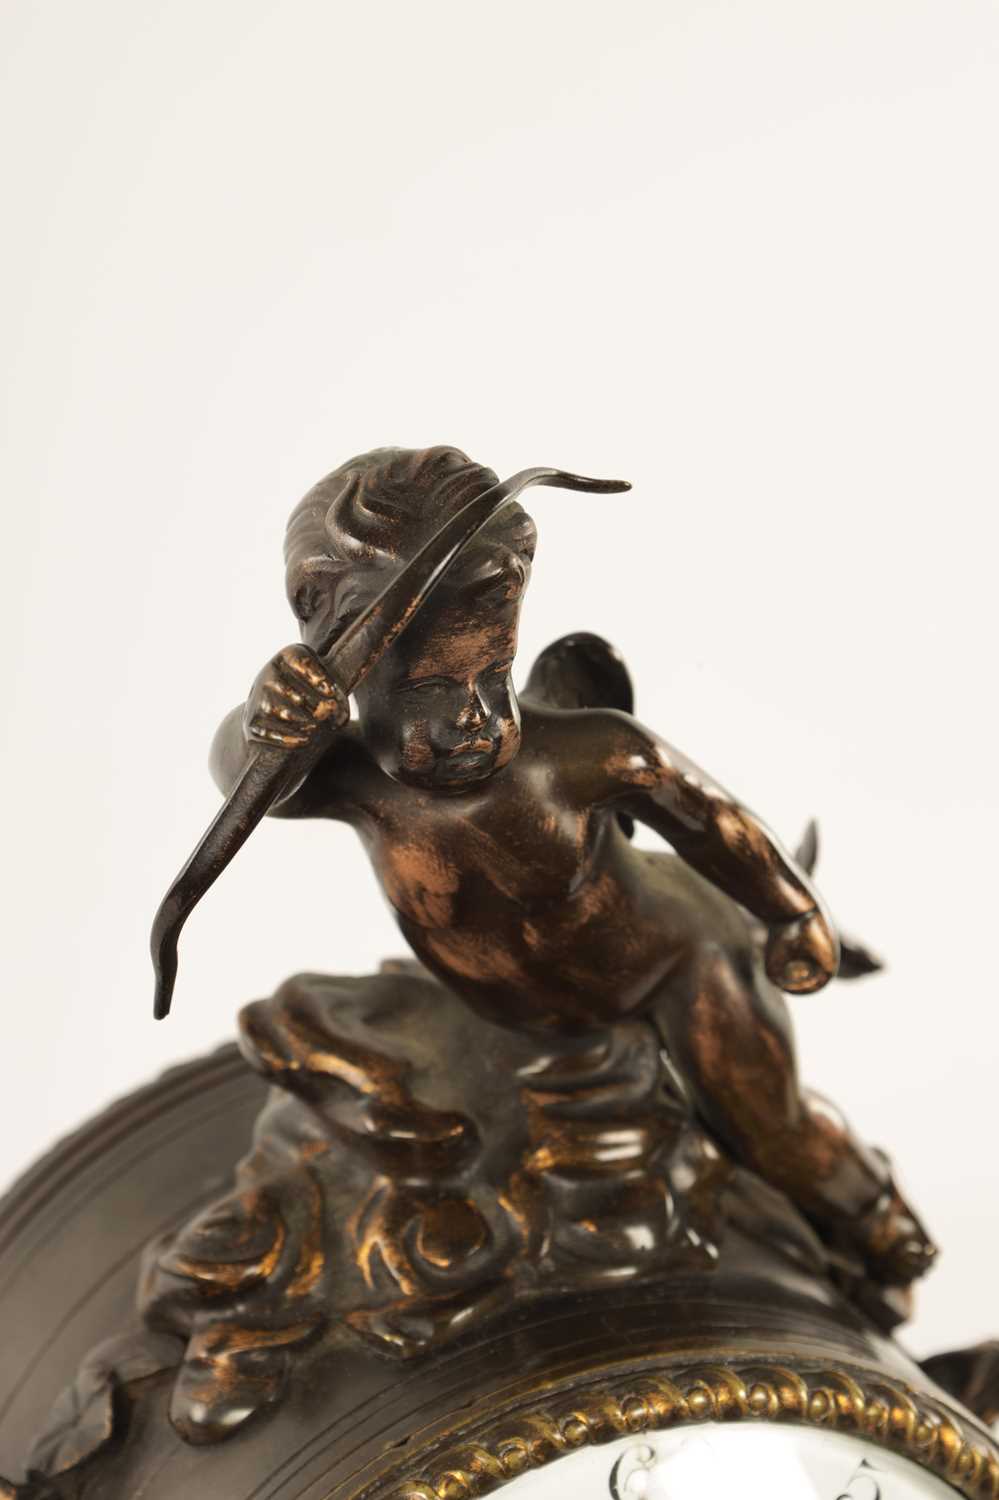 THUILLIER, A PARIS. A LATE 19TH CENTURY FRENCH PATINATED BRONZE MANTEL CLOCK - Image 3 of 14